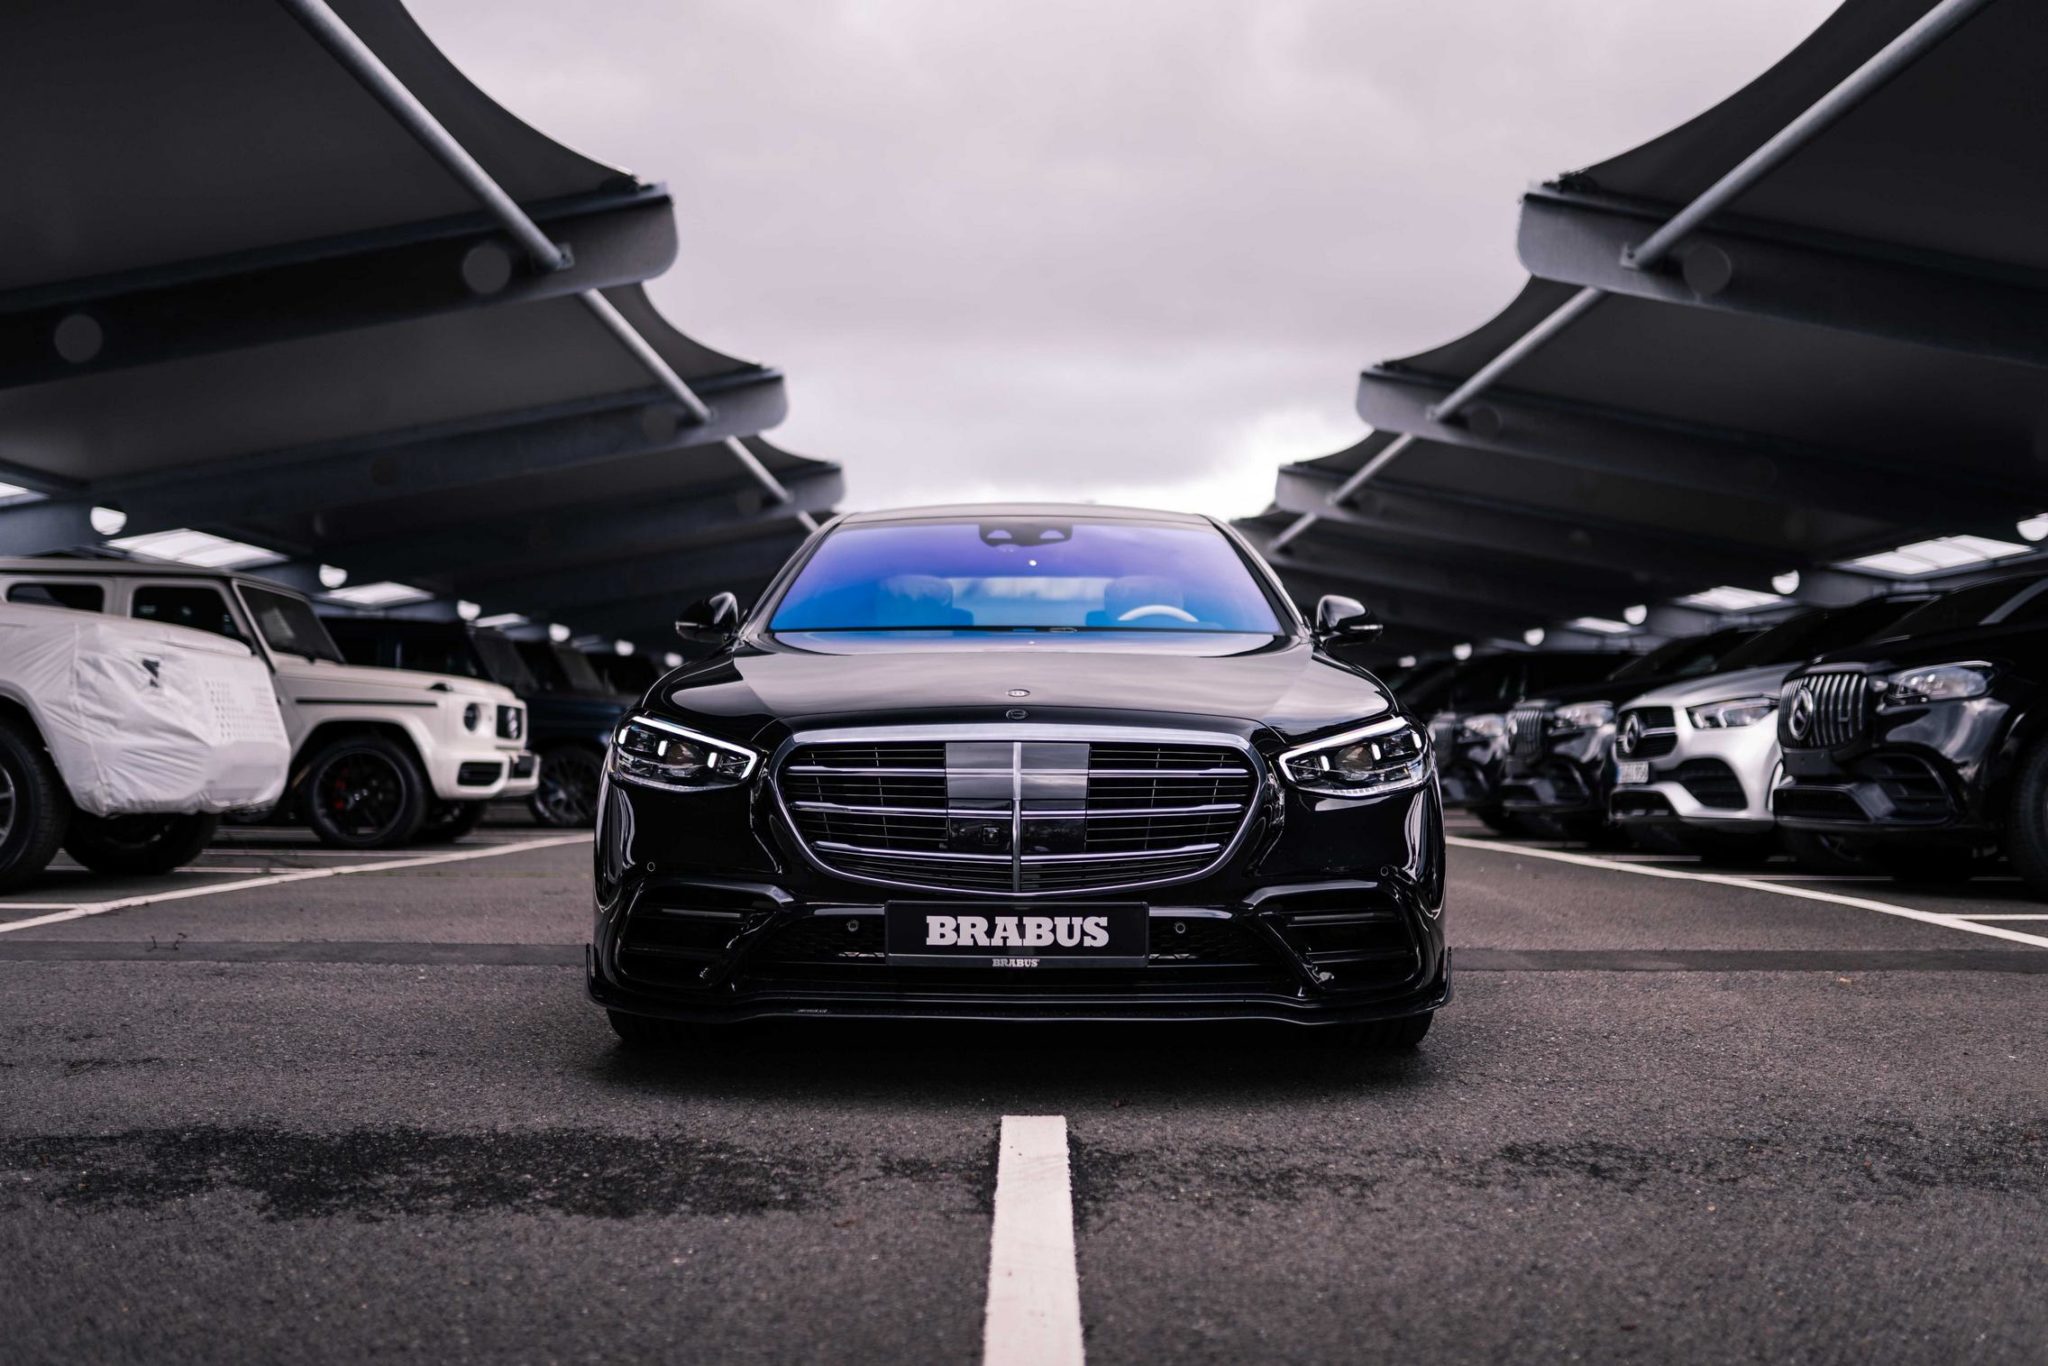 New SClass Has a Brabus Package Already S500 Now Produces 500hp